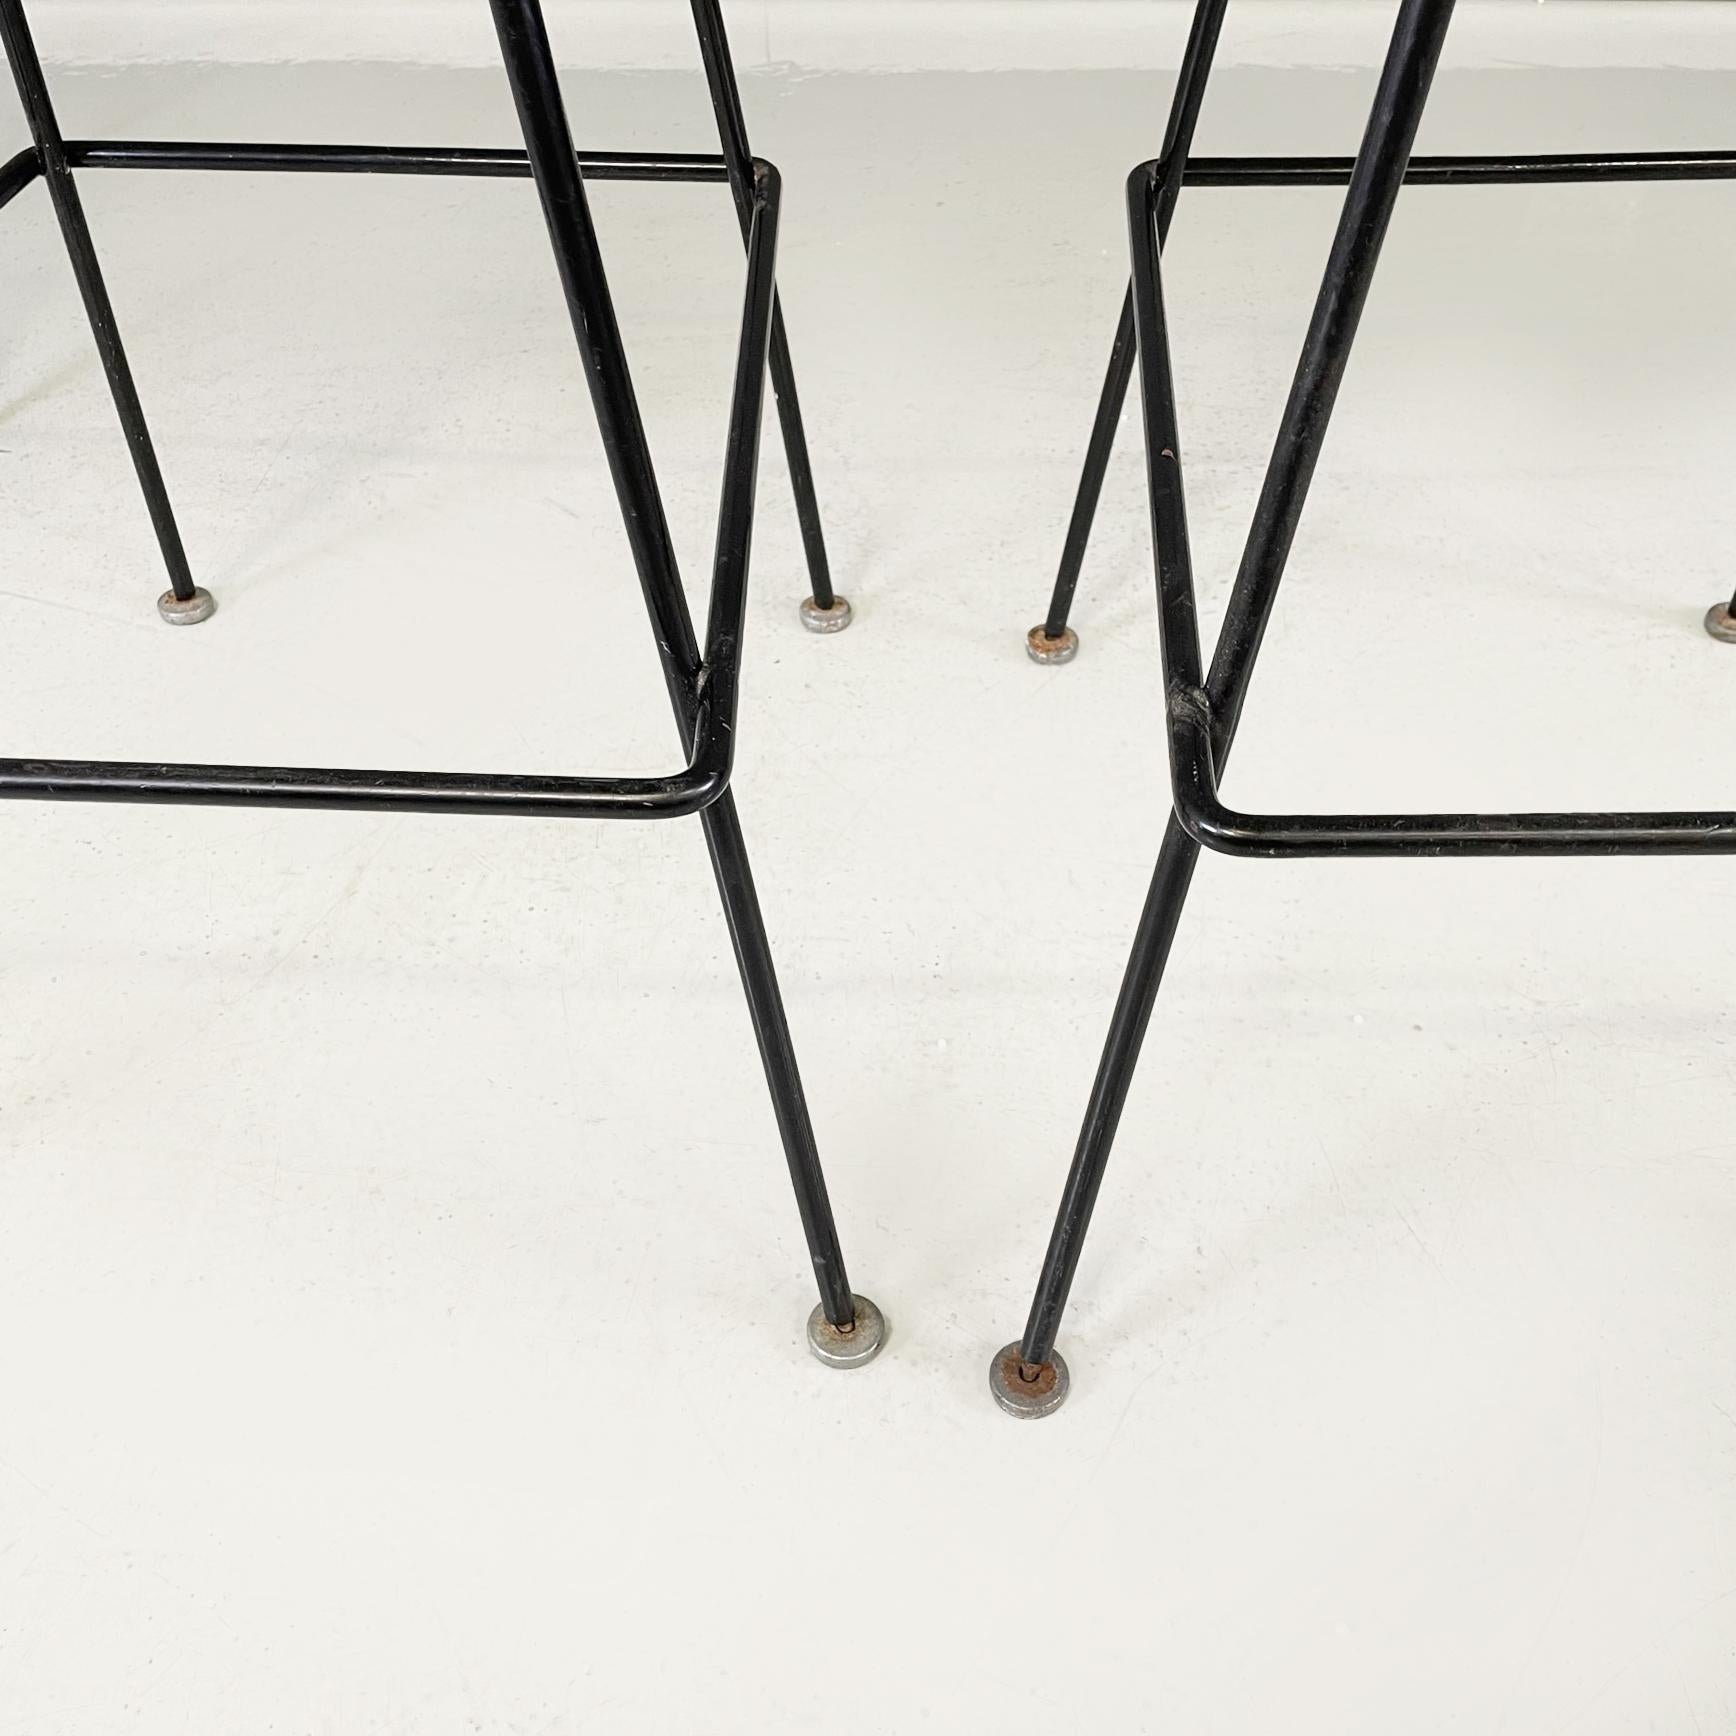 American Midcentury Black White Metal High Stools by Bertoia for Knoll, 1960s For Sale 11